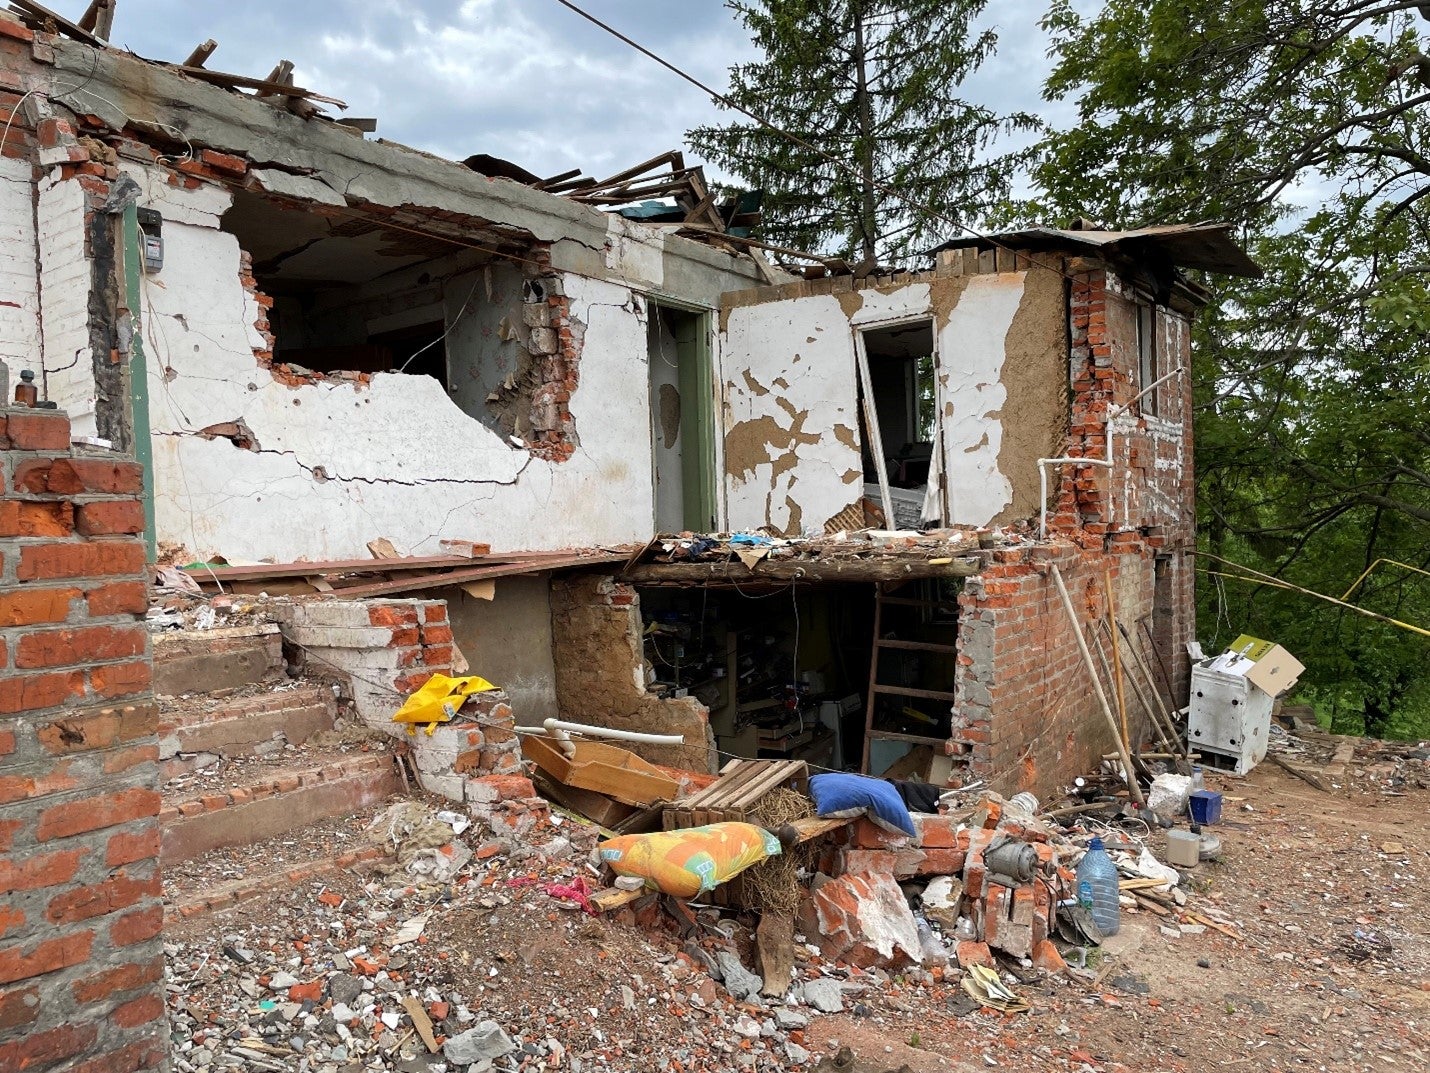 The home of the Bovsunovska family, which was damaged in an attack on March 2 on the village of Yakovlivka, where there was a large presence of Ukrainian Territorial Defense Forces and Border Guards. The attack killed at least four civilians and wounded at least 10, including from the Bovsunovska family, May 25, 2022.